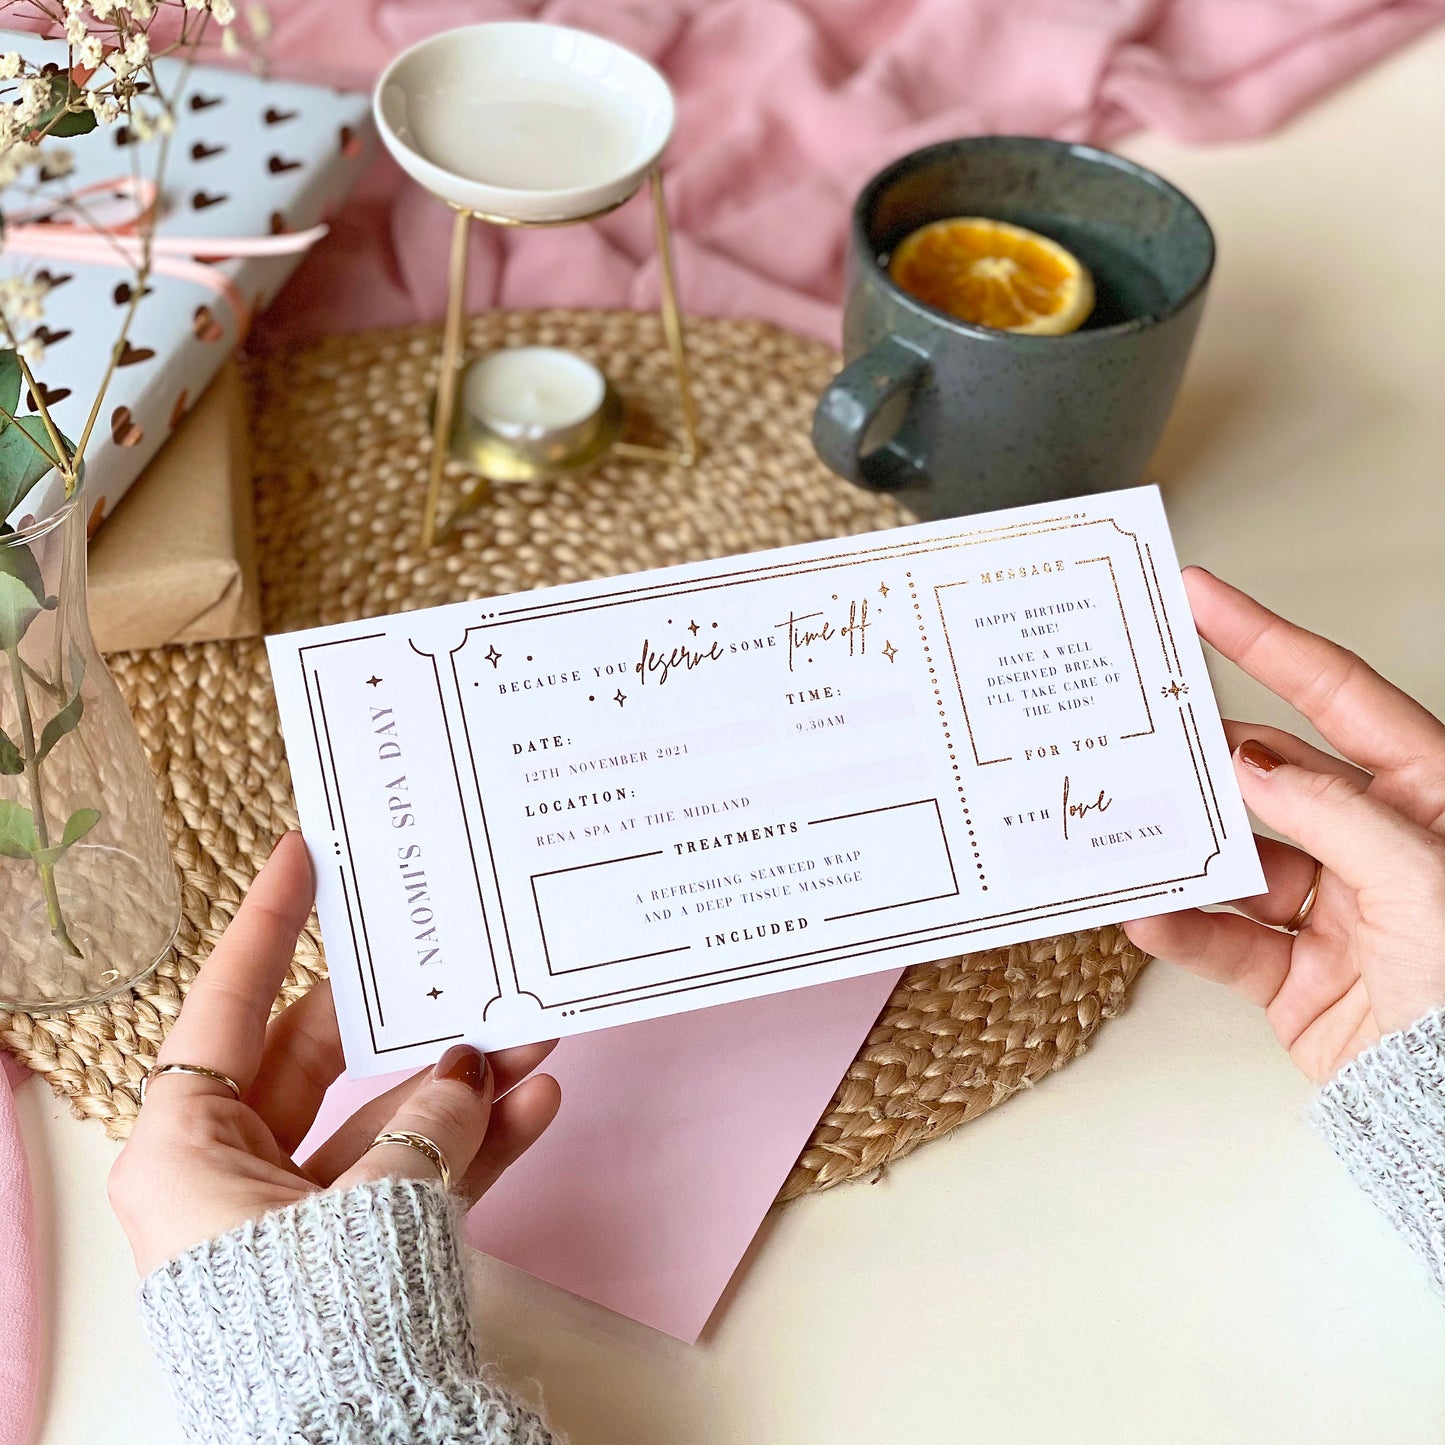 Spa Day Treatment Announcement Ticket Gift